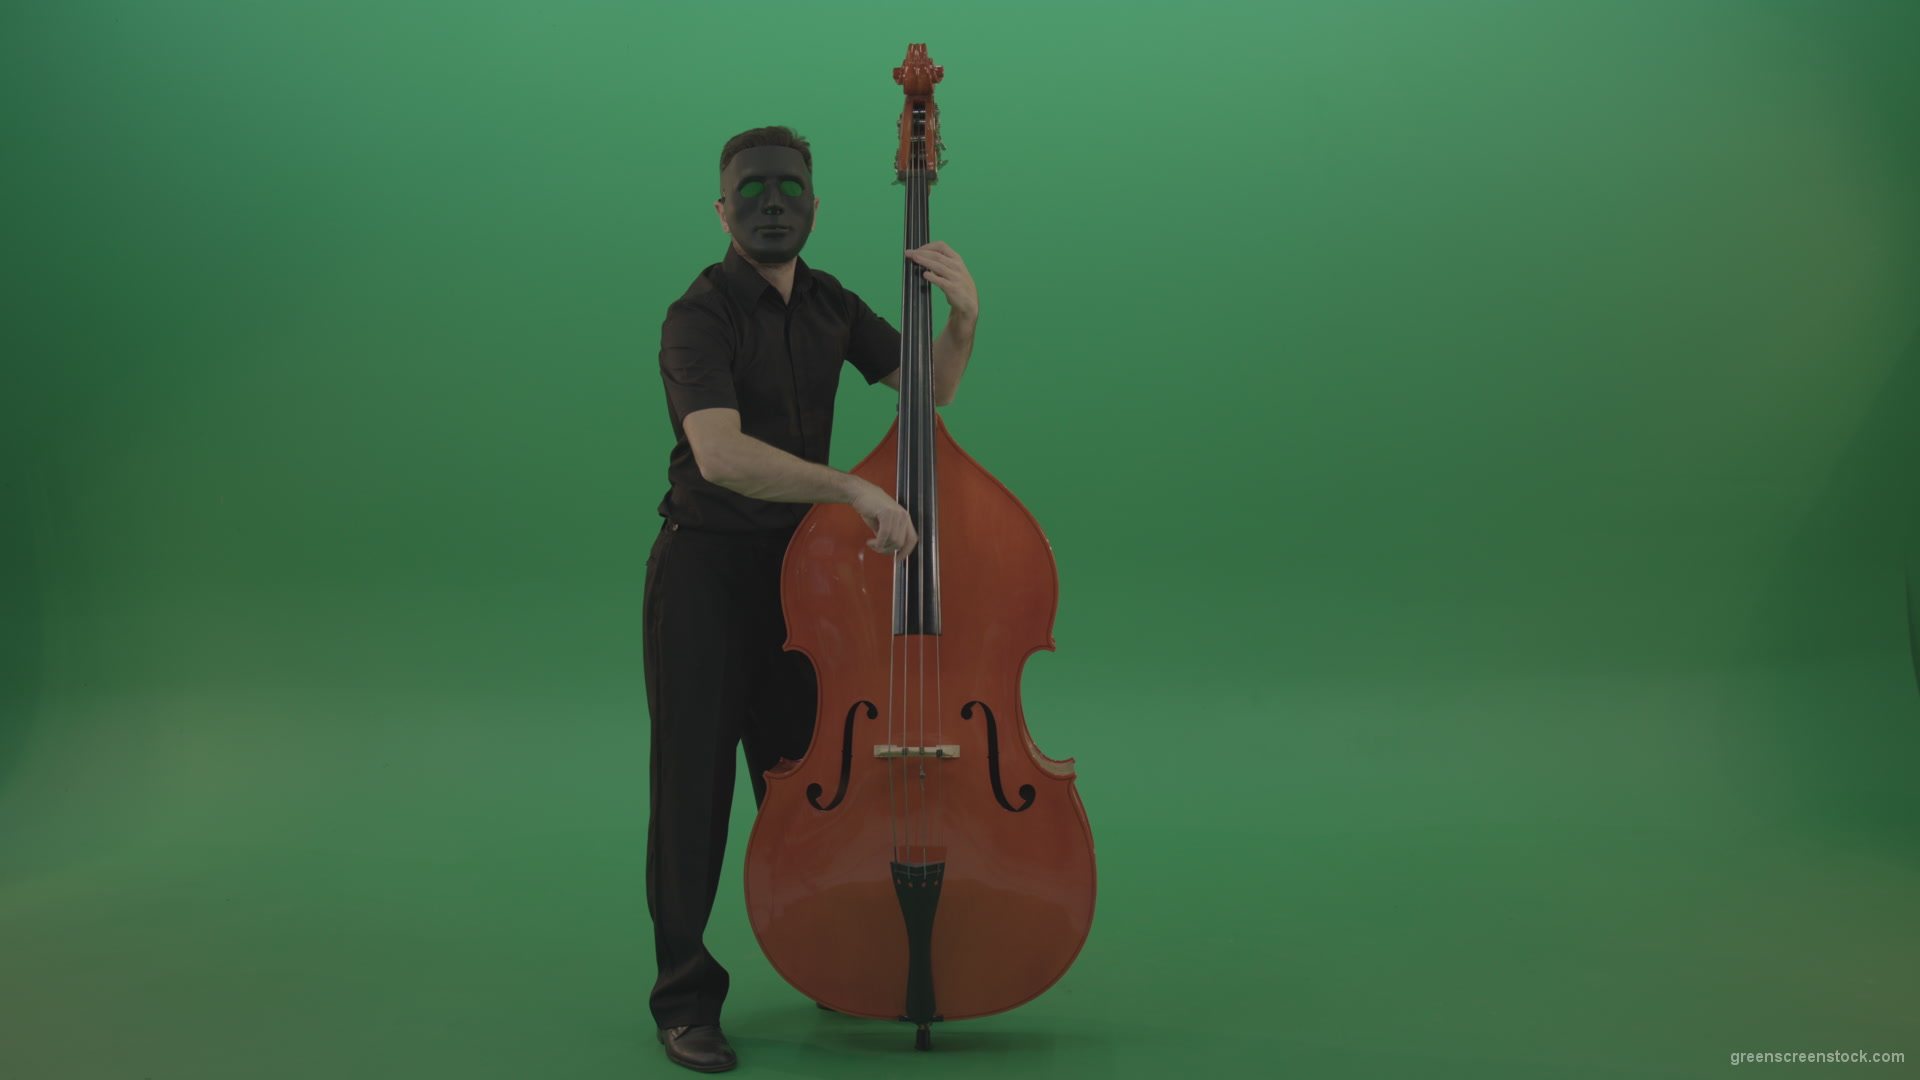 Full-size-man-in-black-gead-mask-with-chromakey-eyes-play-jazz-on-double-bass-String-music-instrument-isolated-on-green-screen_001 Green Screen Stock